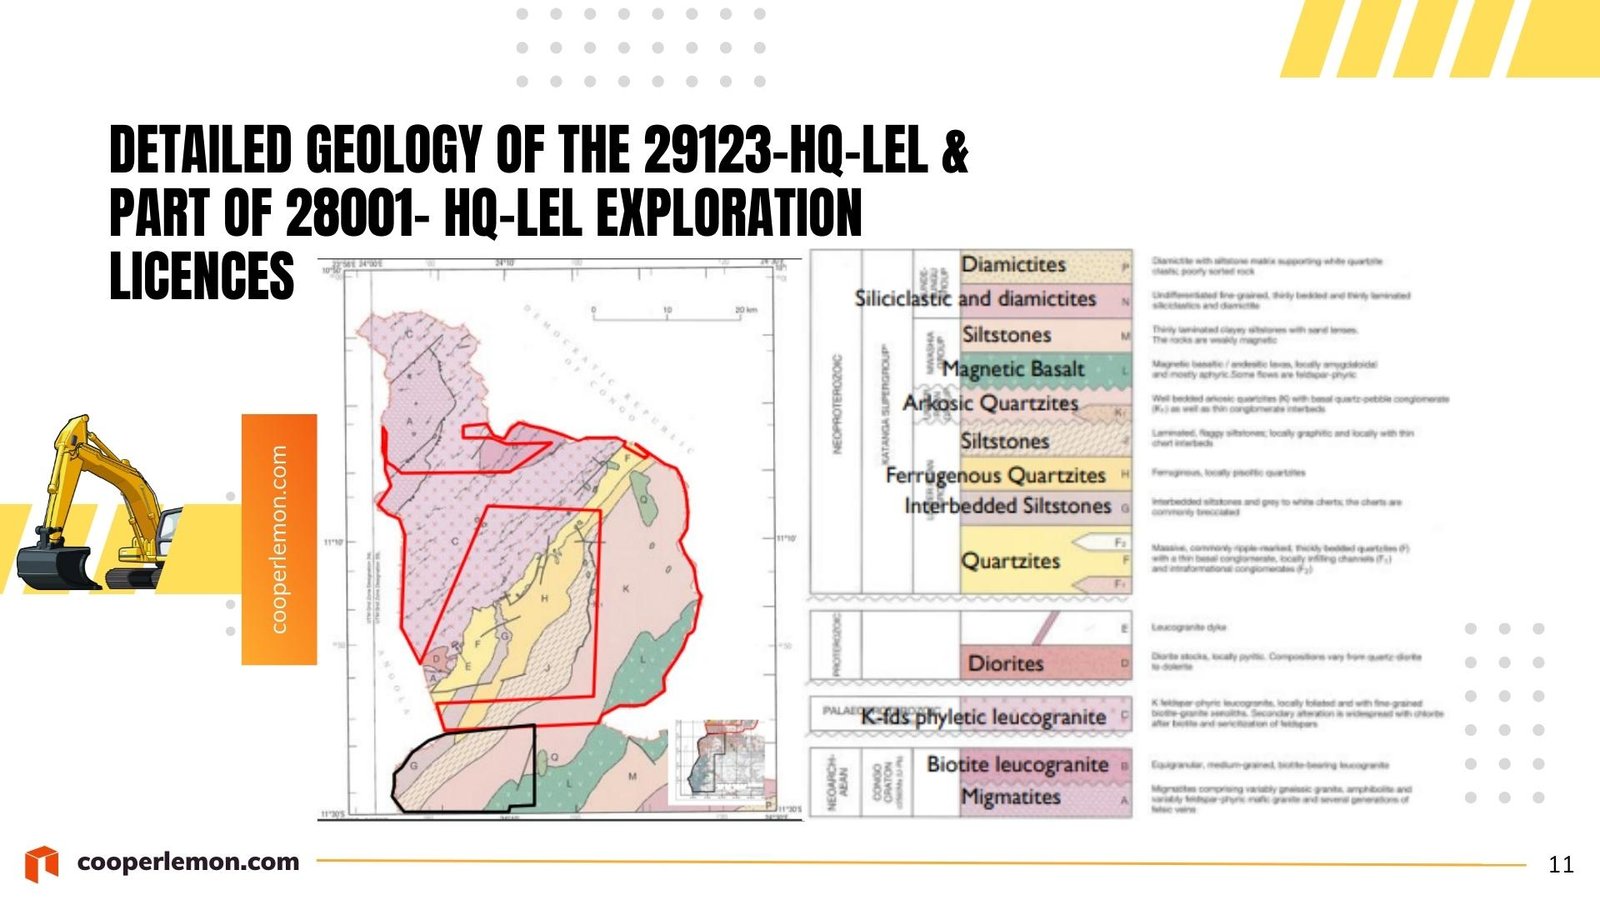 Detailed Geology of the 29123-HQ-LEL & part of 28001- HQ-LEL Exploration Licences